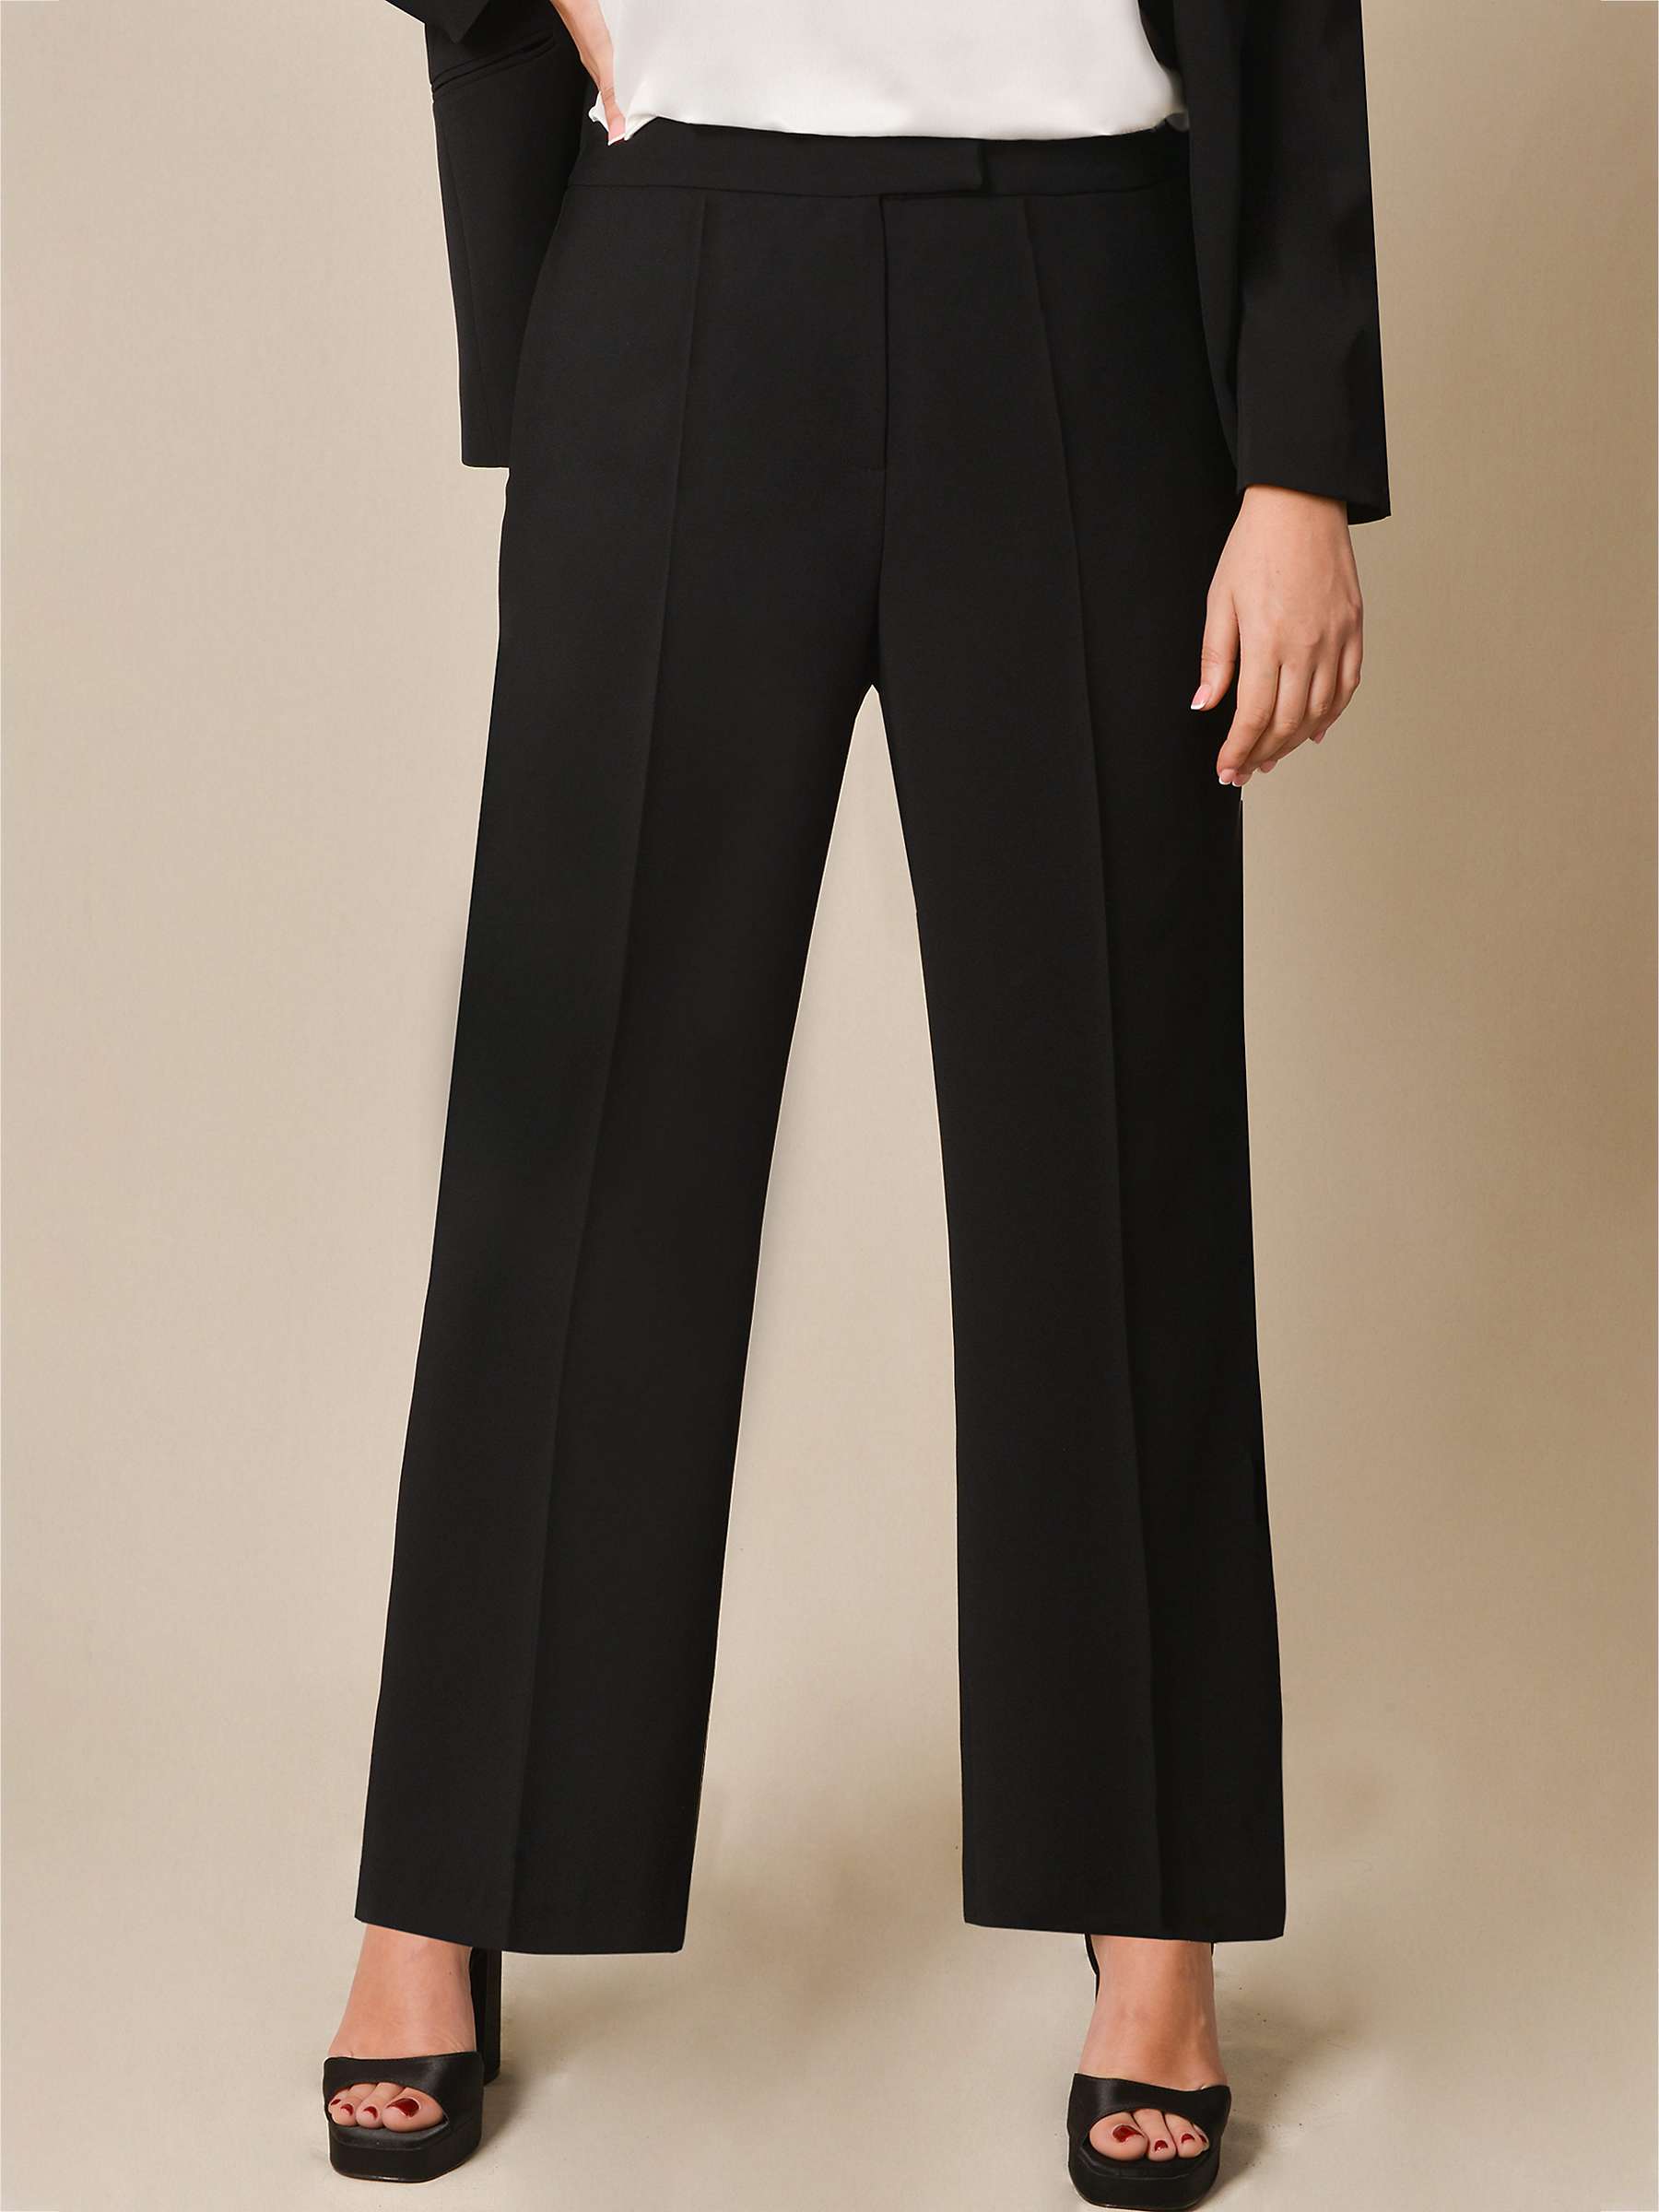 Buy Live Unlimited Straight Cut Trousers, Black Online at johnlewis.com